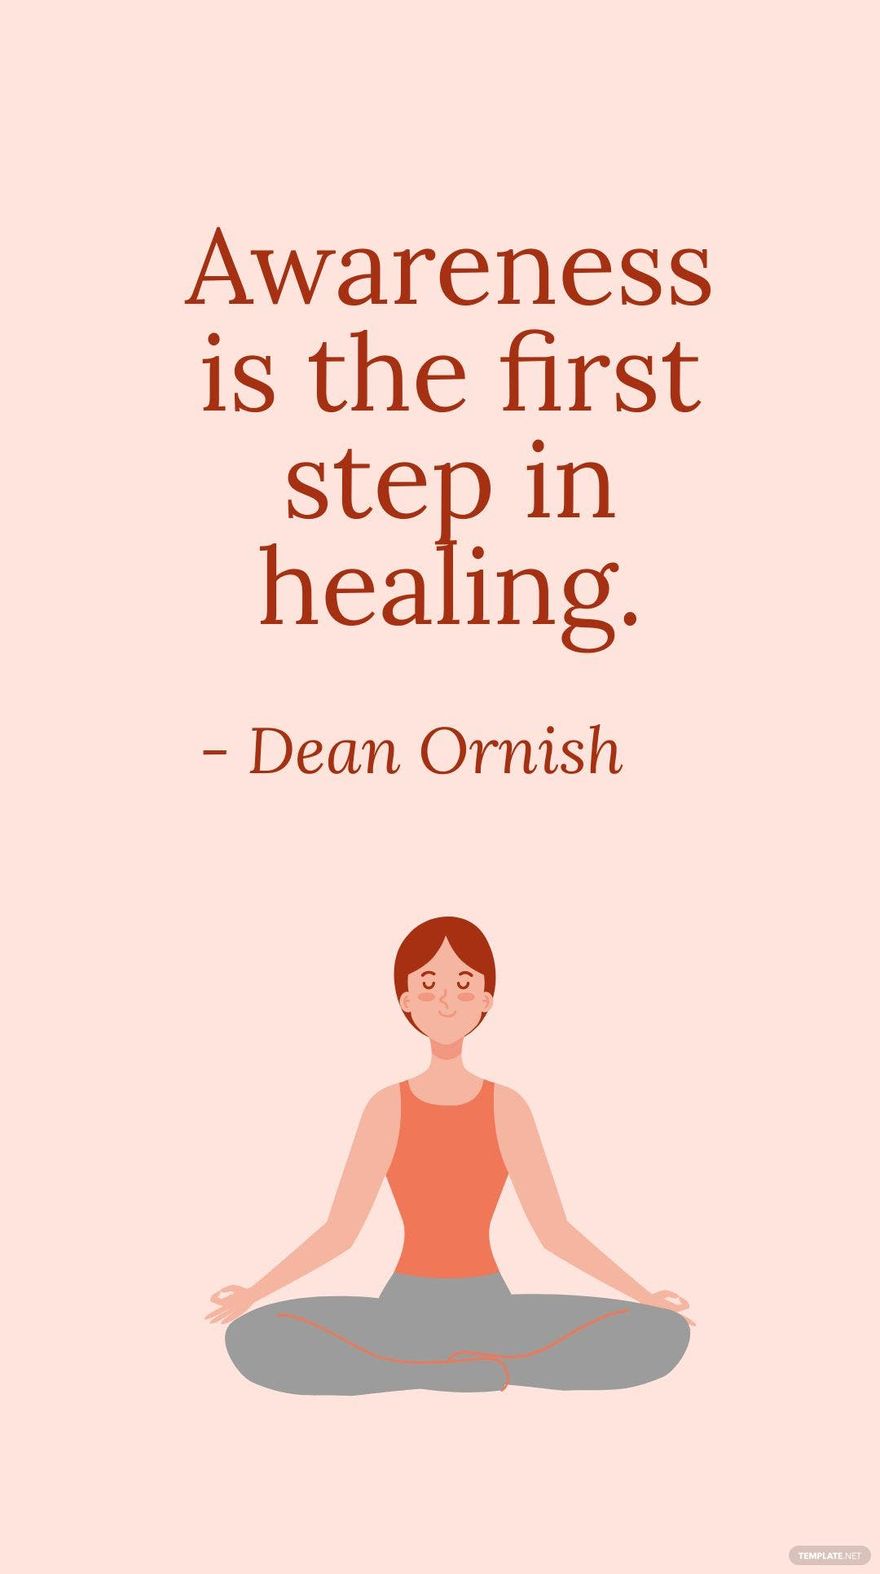 Free Dean Ornish - Awareness is the first step in healing. in JPG